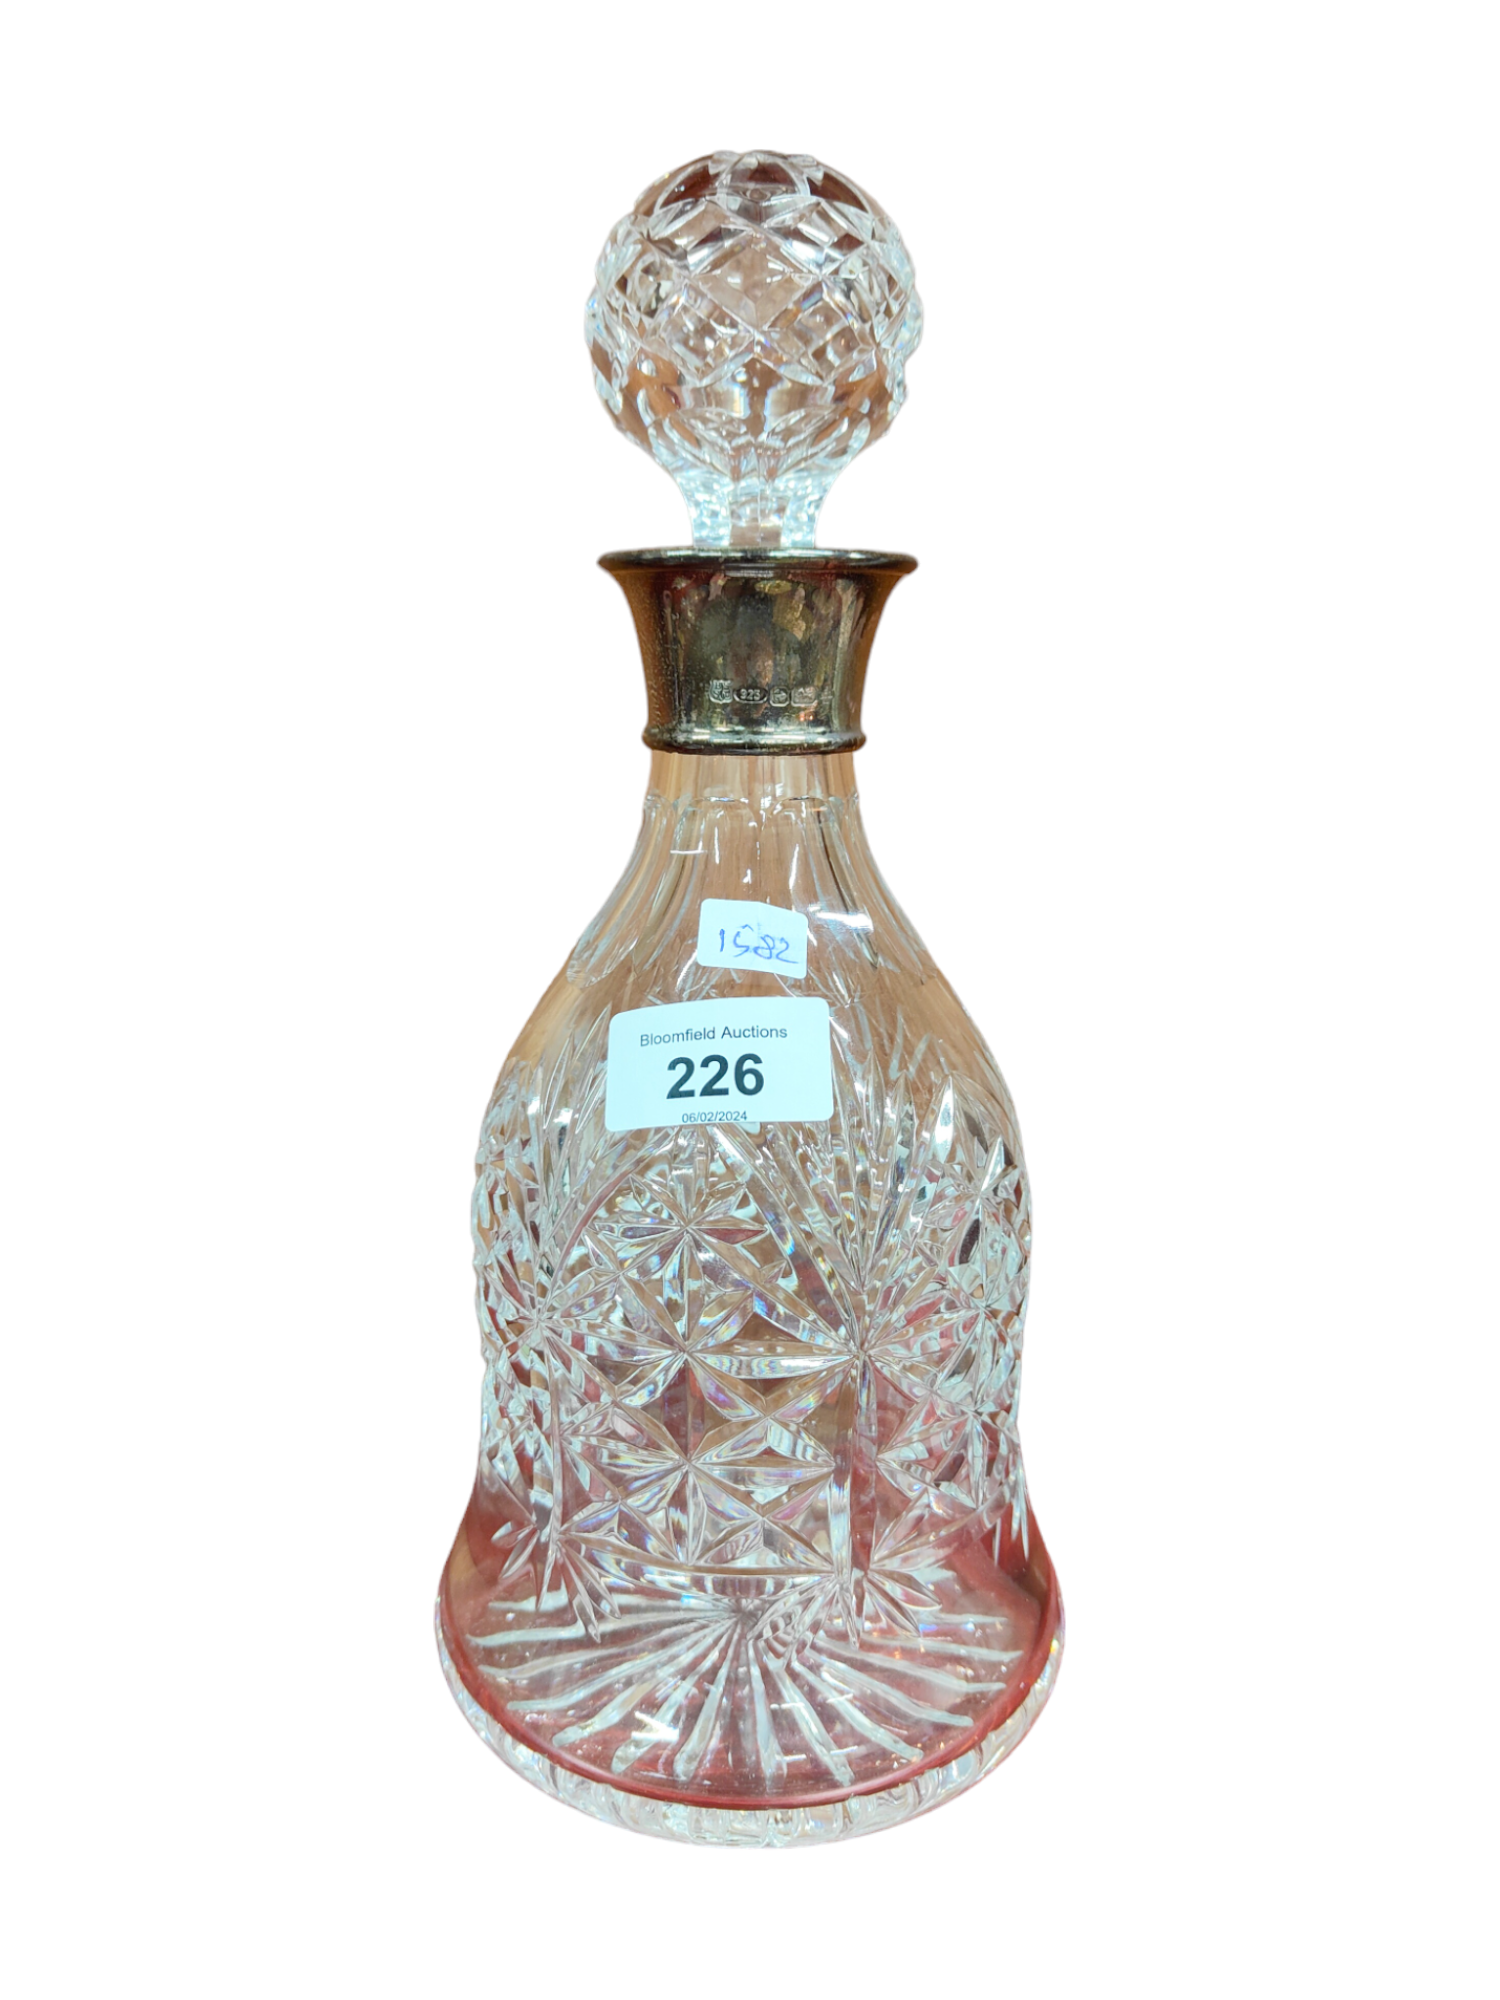 CUT GLASS DECANTER WITH SILVER COLLAR